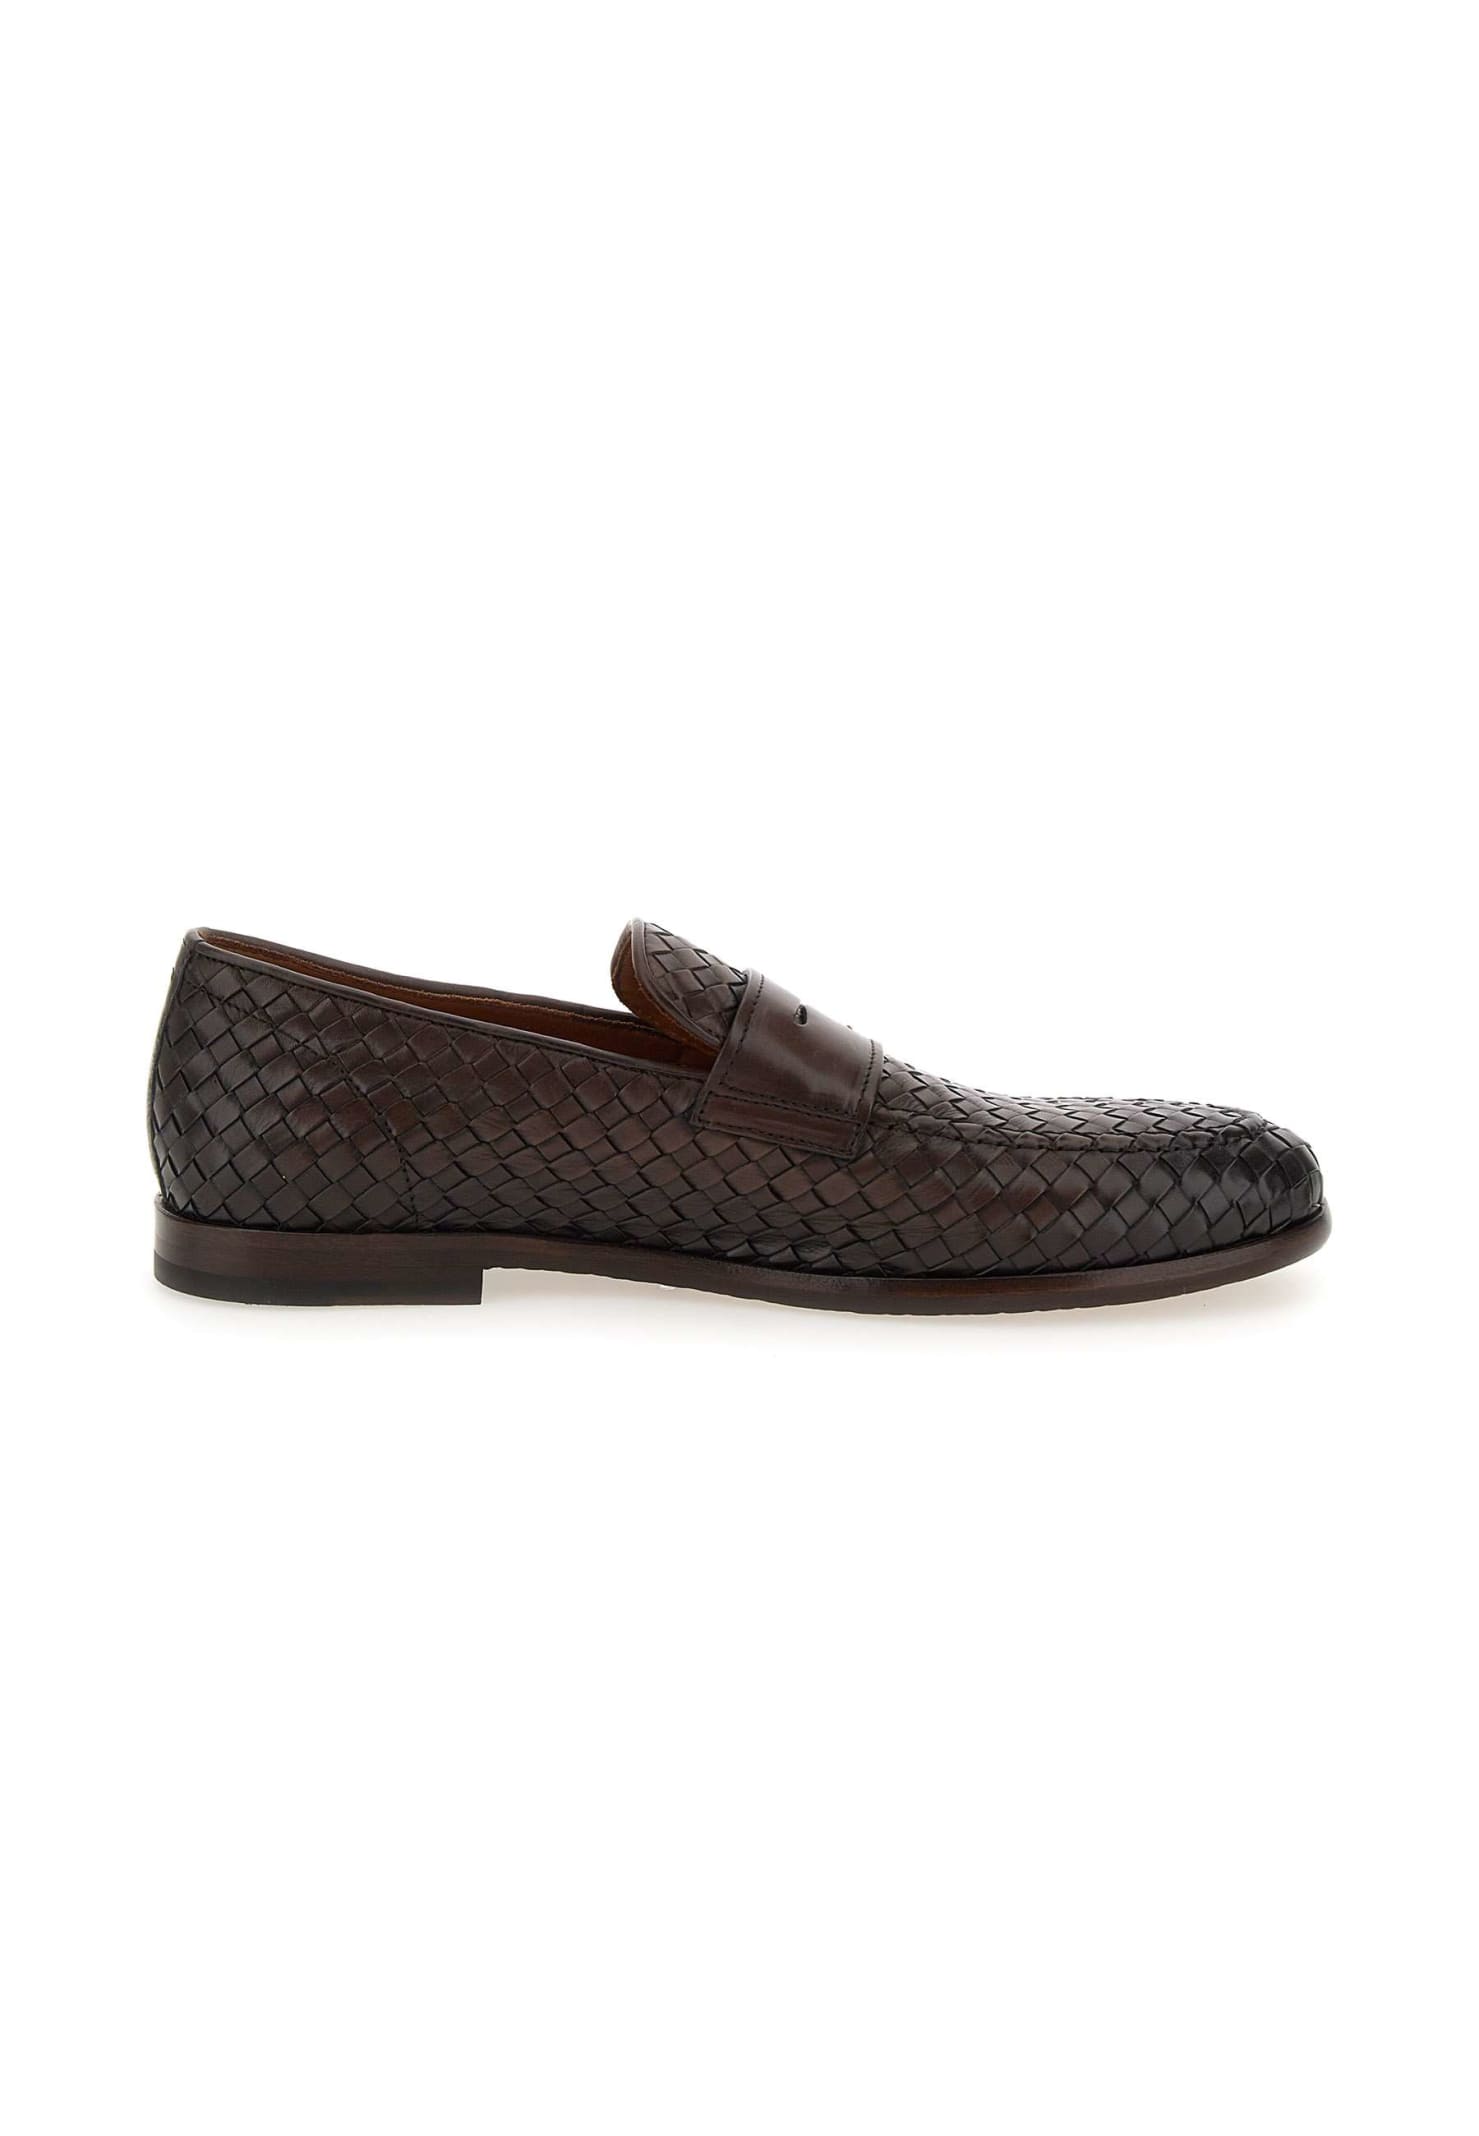 DOUCAL'S PENNY LEATHER MOCCASIN